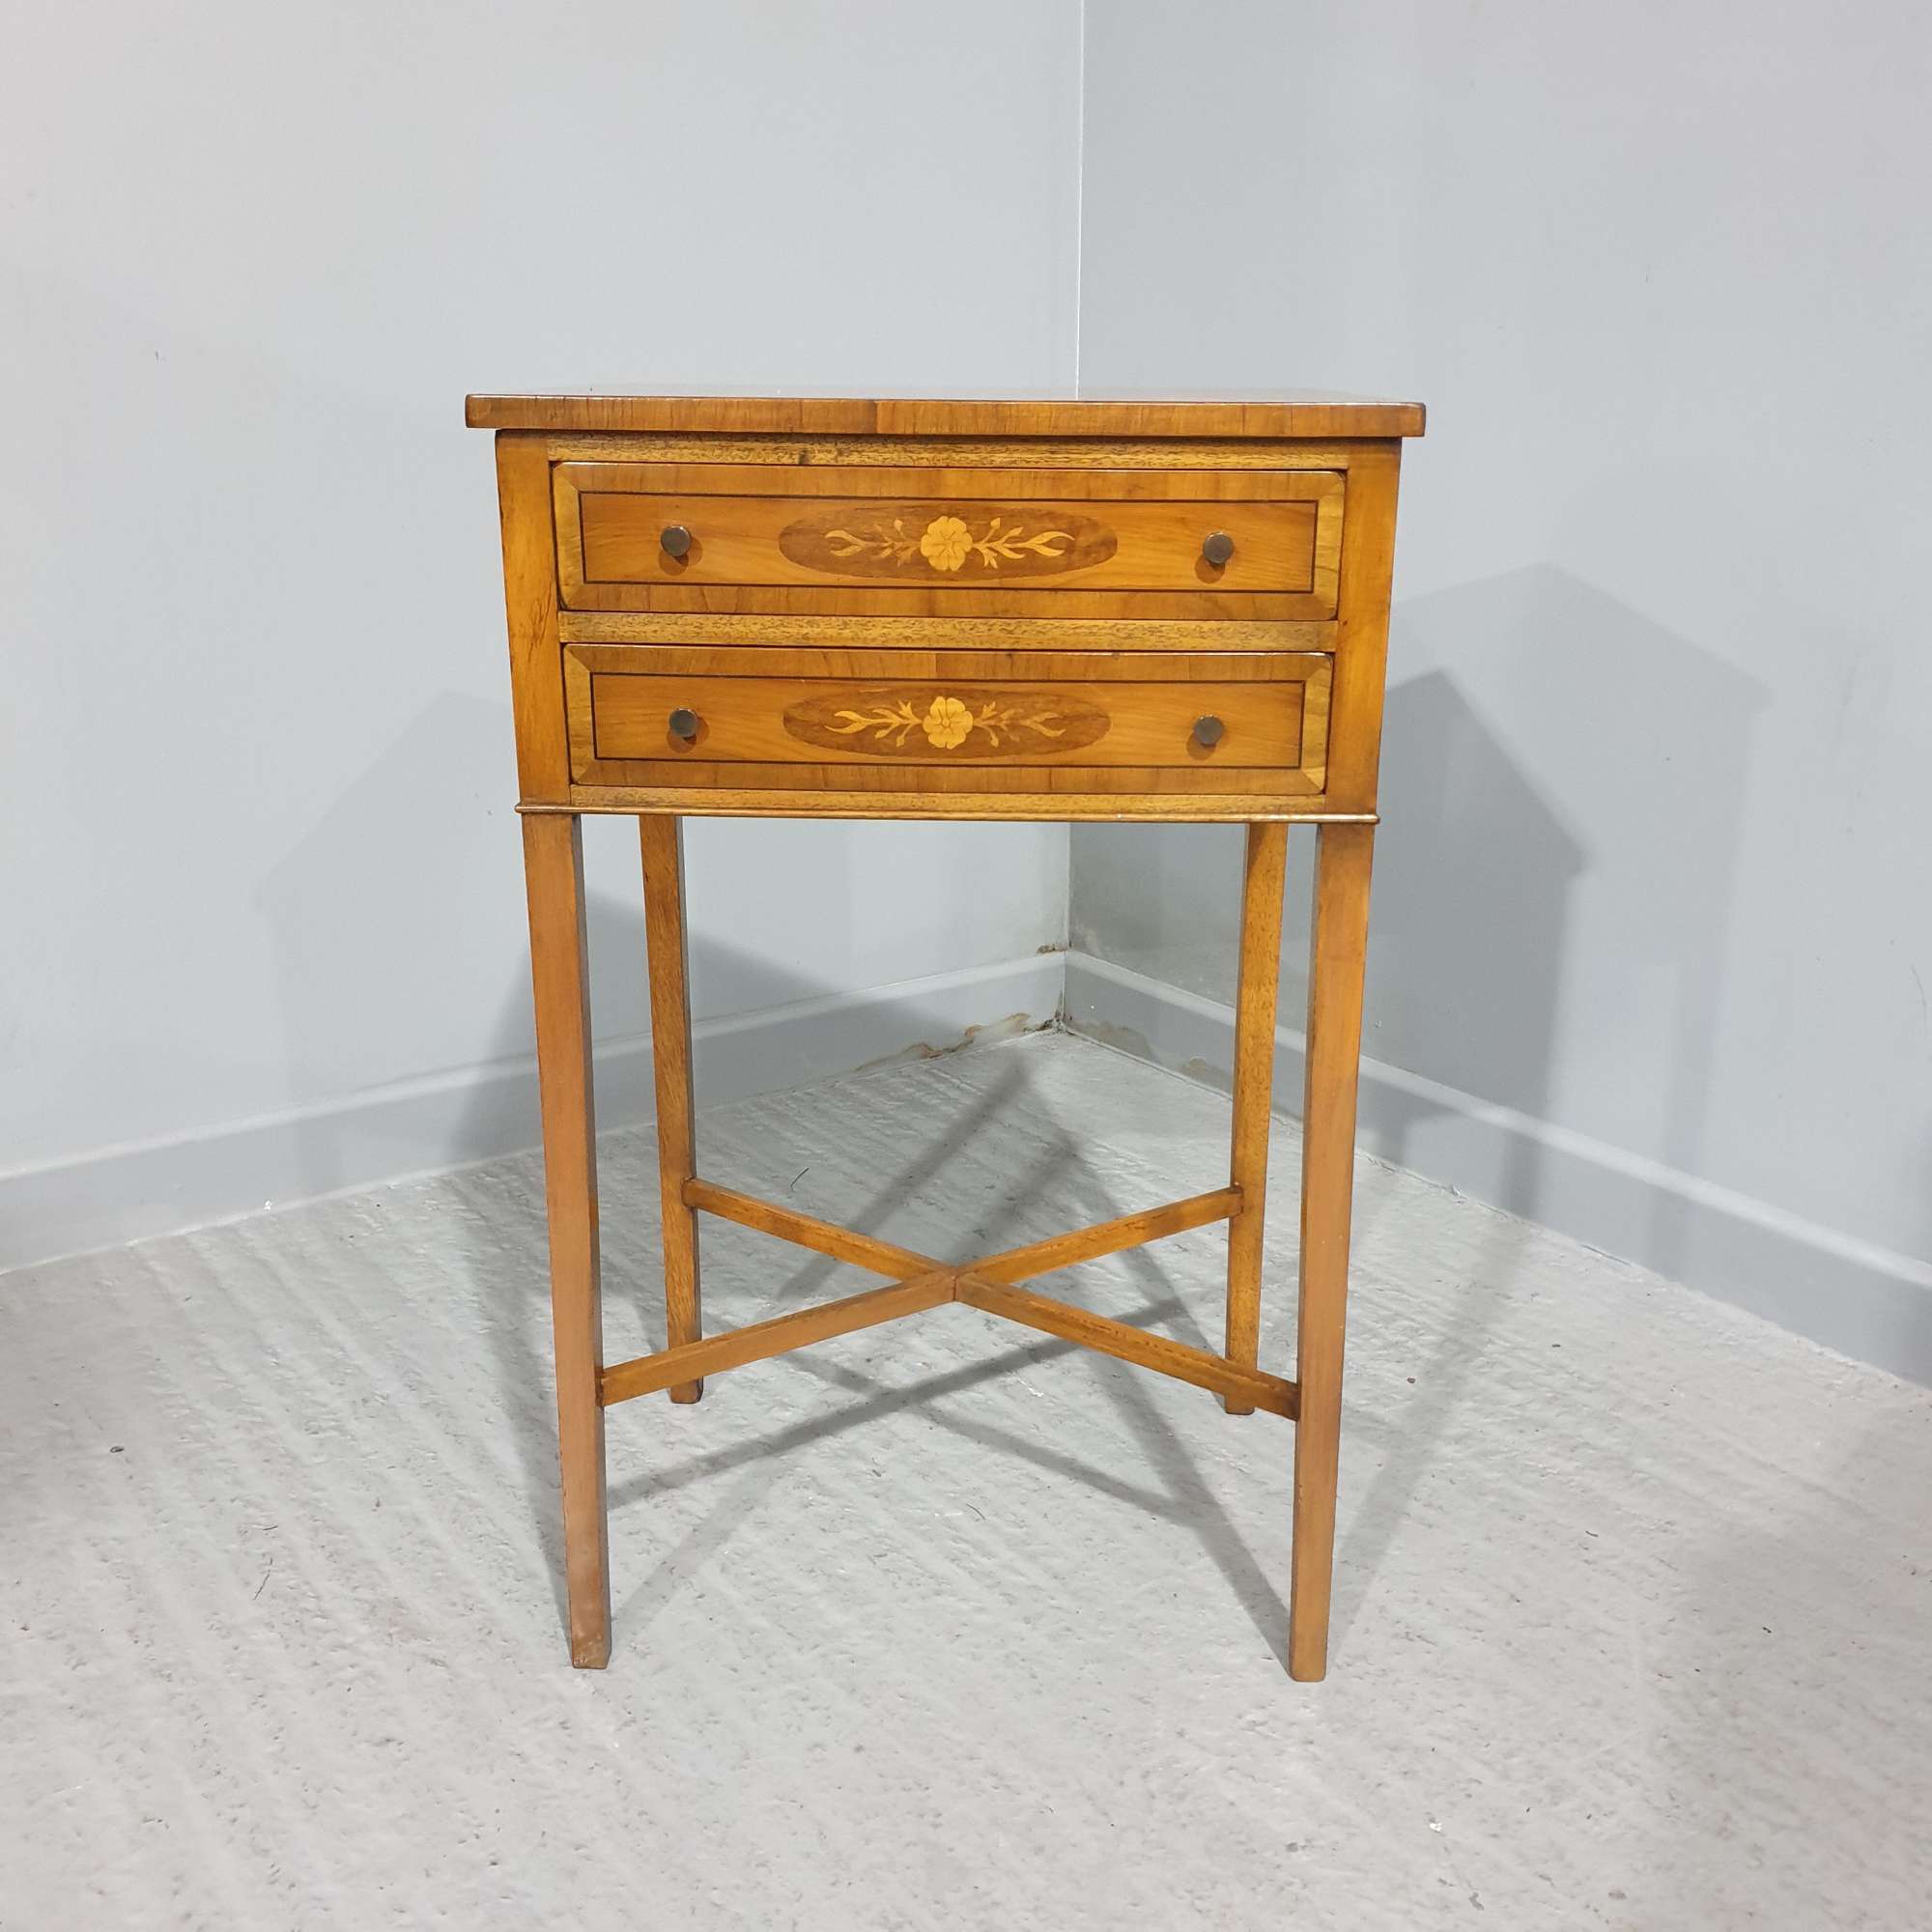 Yew Wood Inlaid Side Lamp Table